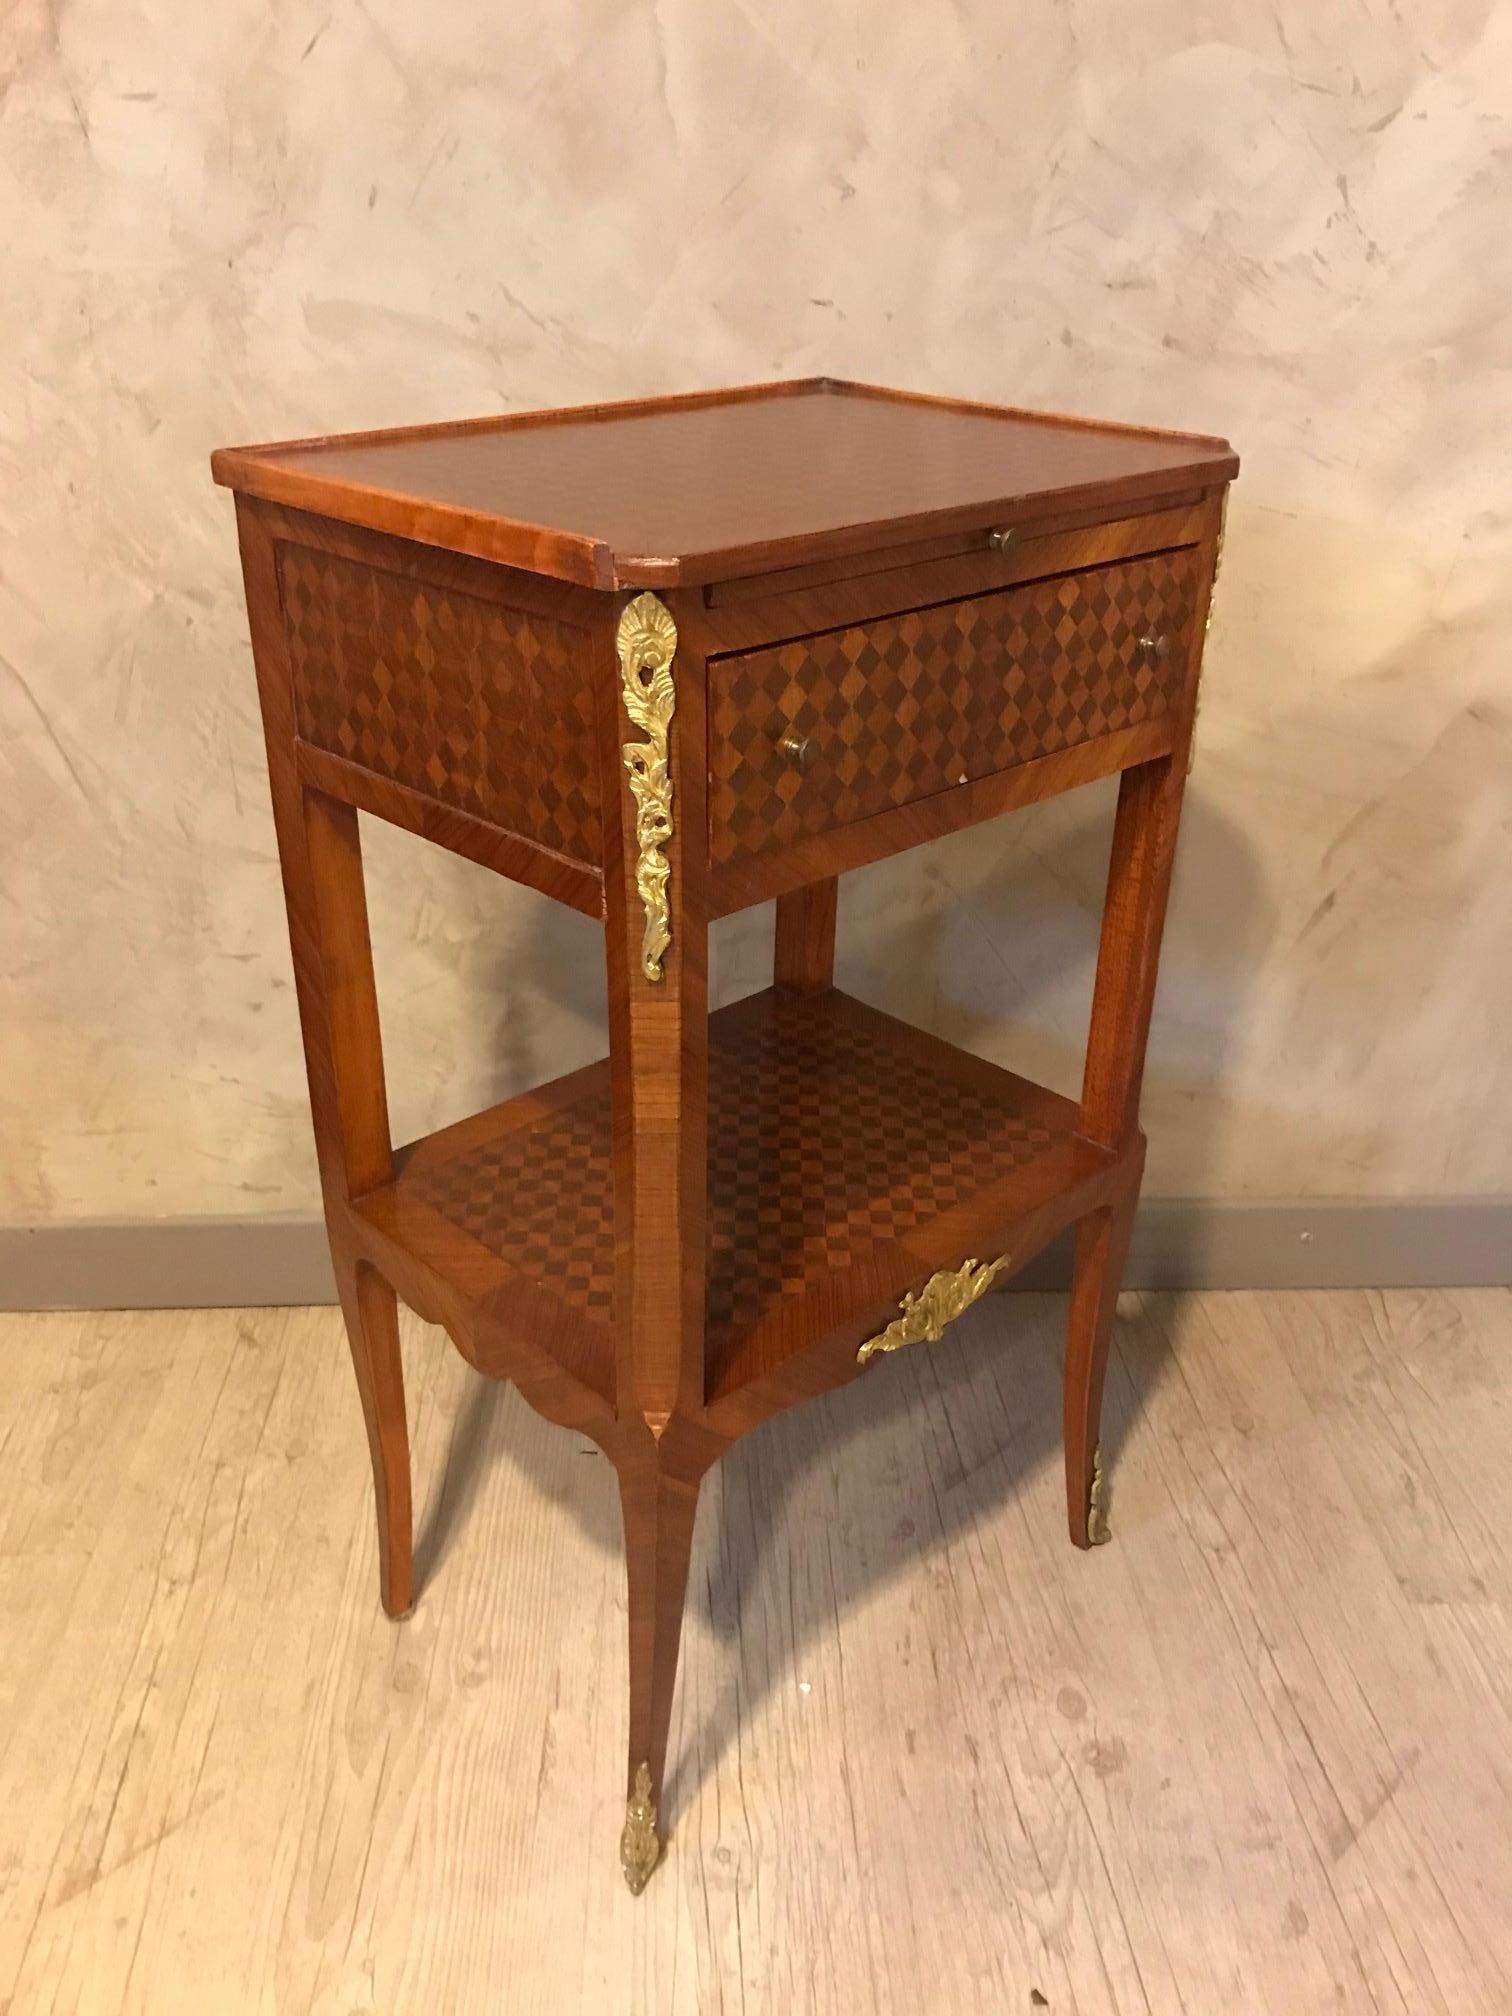 Very nice 20th century French Louis XV, Louis XVI transition style bedside made with mahogany marquetry and bronze fittings. A drawer.
Small hiding table with a leather on top that could be pulled.
Beautiful squared bi-colored marquetry. Gilded